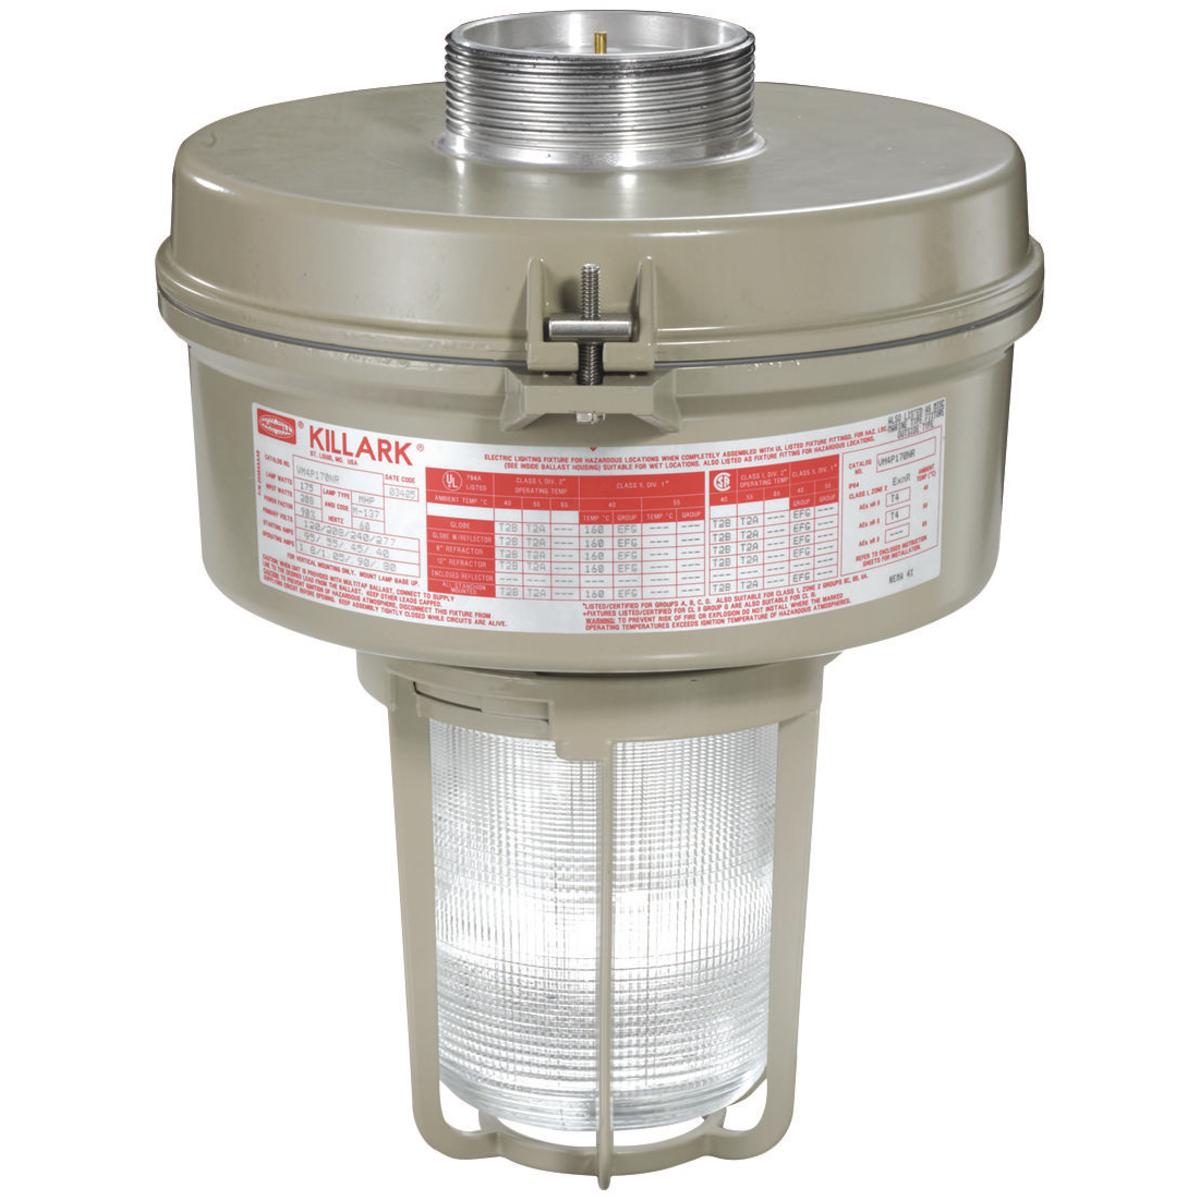 Hubbell VM3P150EZGLG VM3 Series - 150W Metal Halide Quadri-Volt - EZ Mount Adapter -  Globe and Guard  ; Ballast tank and splice box – corrosion resistant copper-free aluminum alloy with baked powder epoxy/polyester finish, electrostatically applied for complete, uniform corr